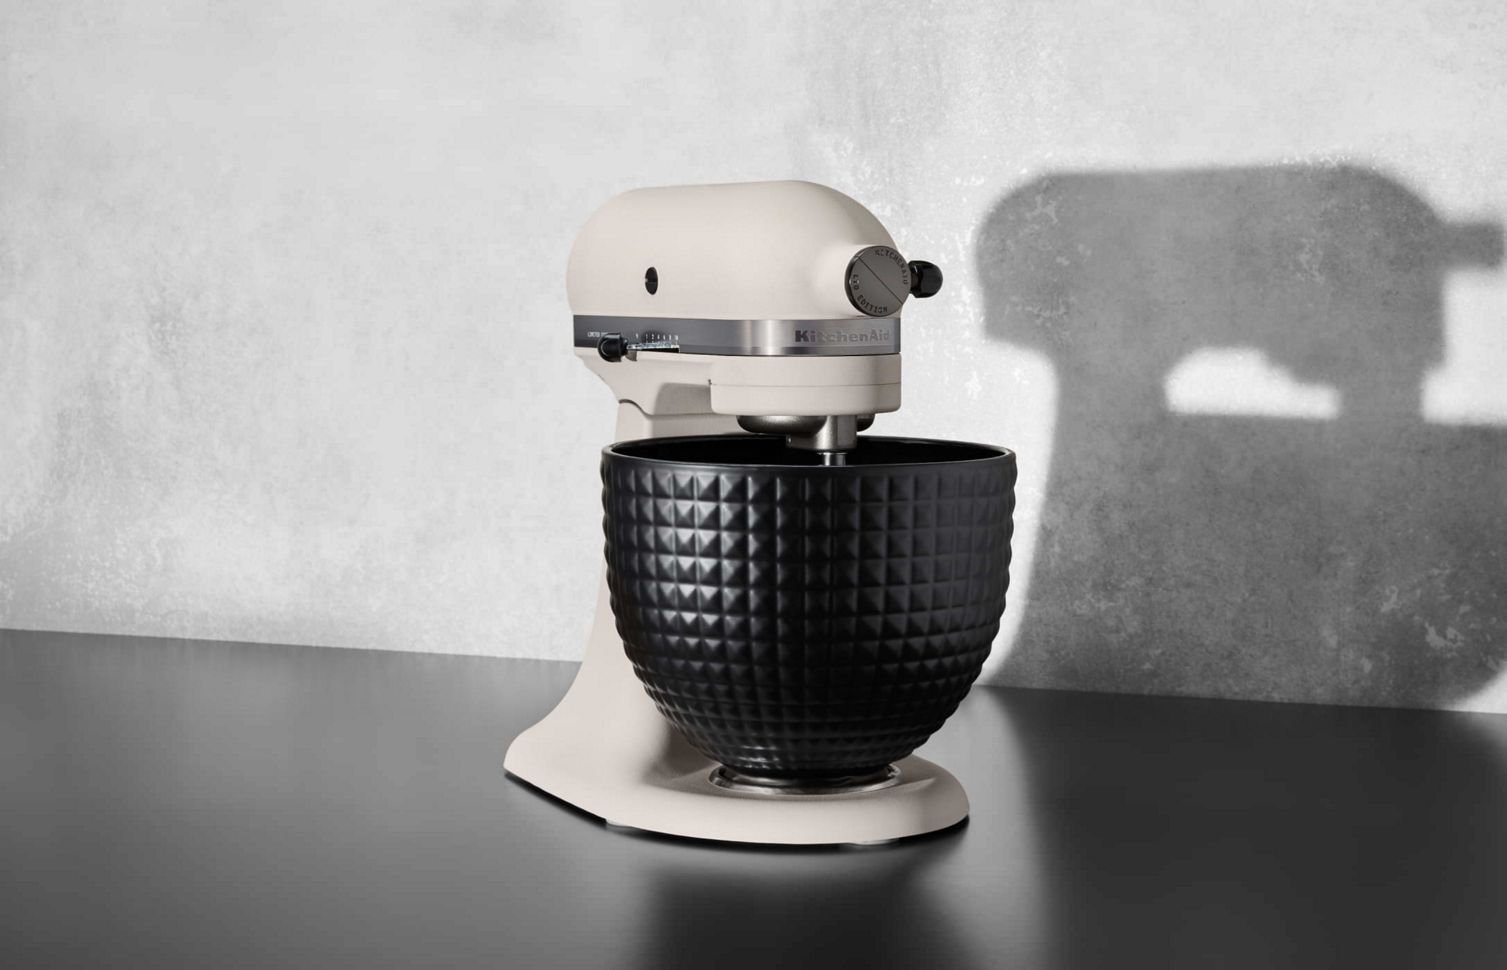 A stand-alone Limited Edition Stand Mixer with a black ceramic studded bowl.